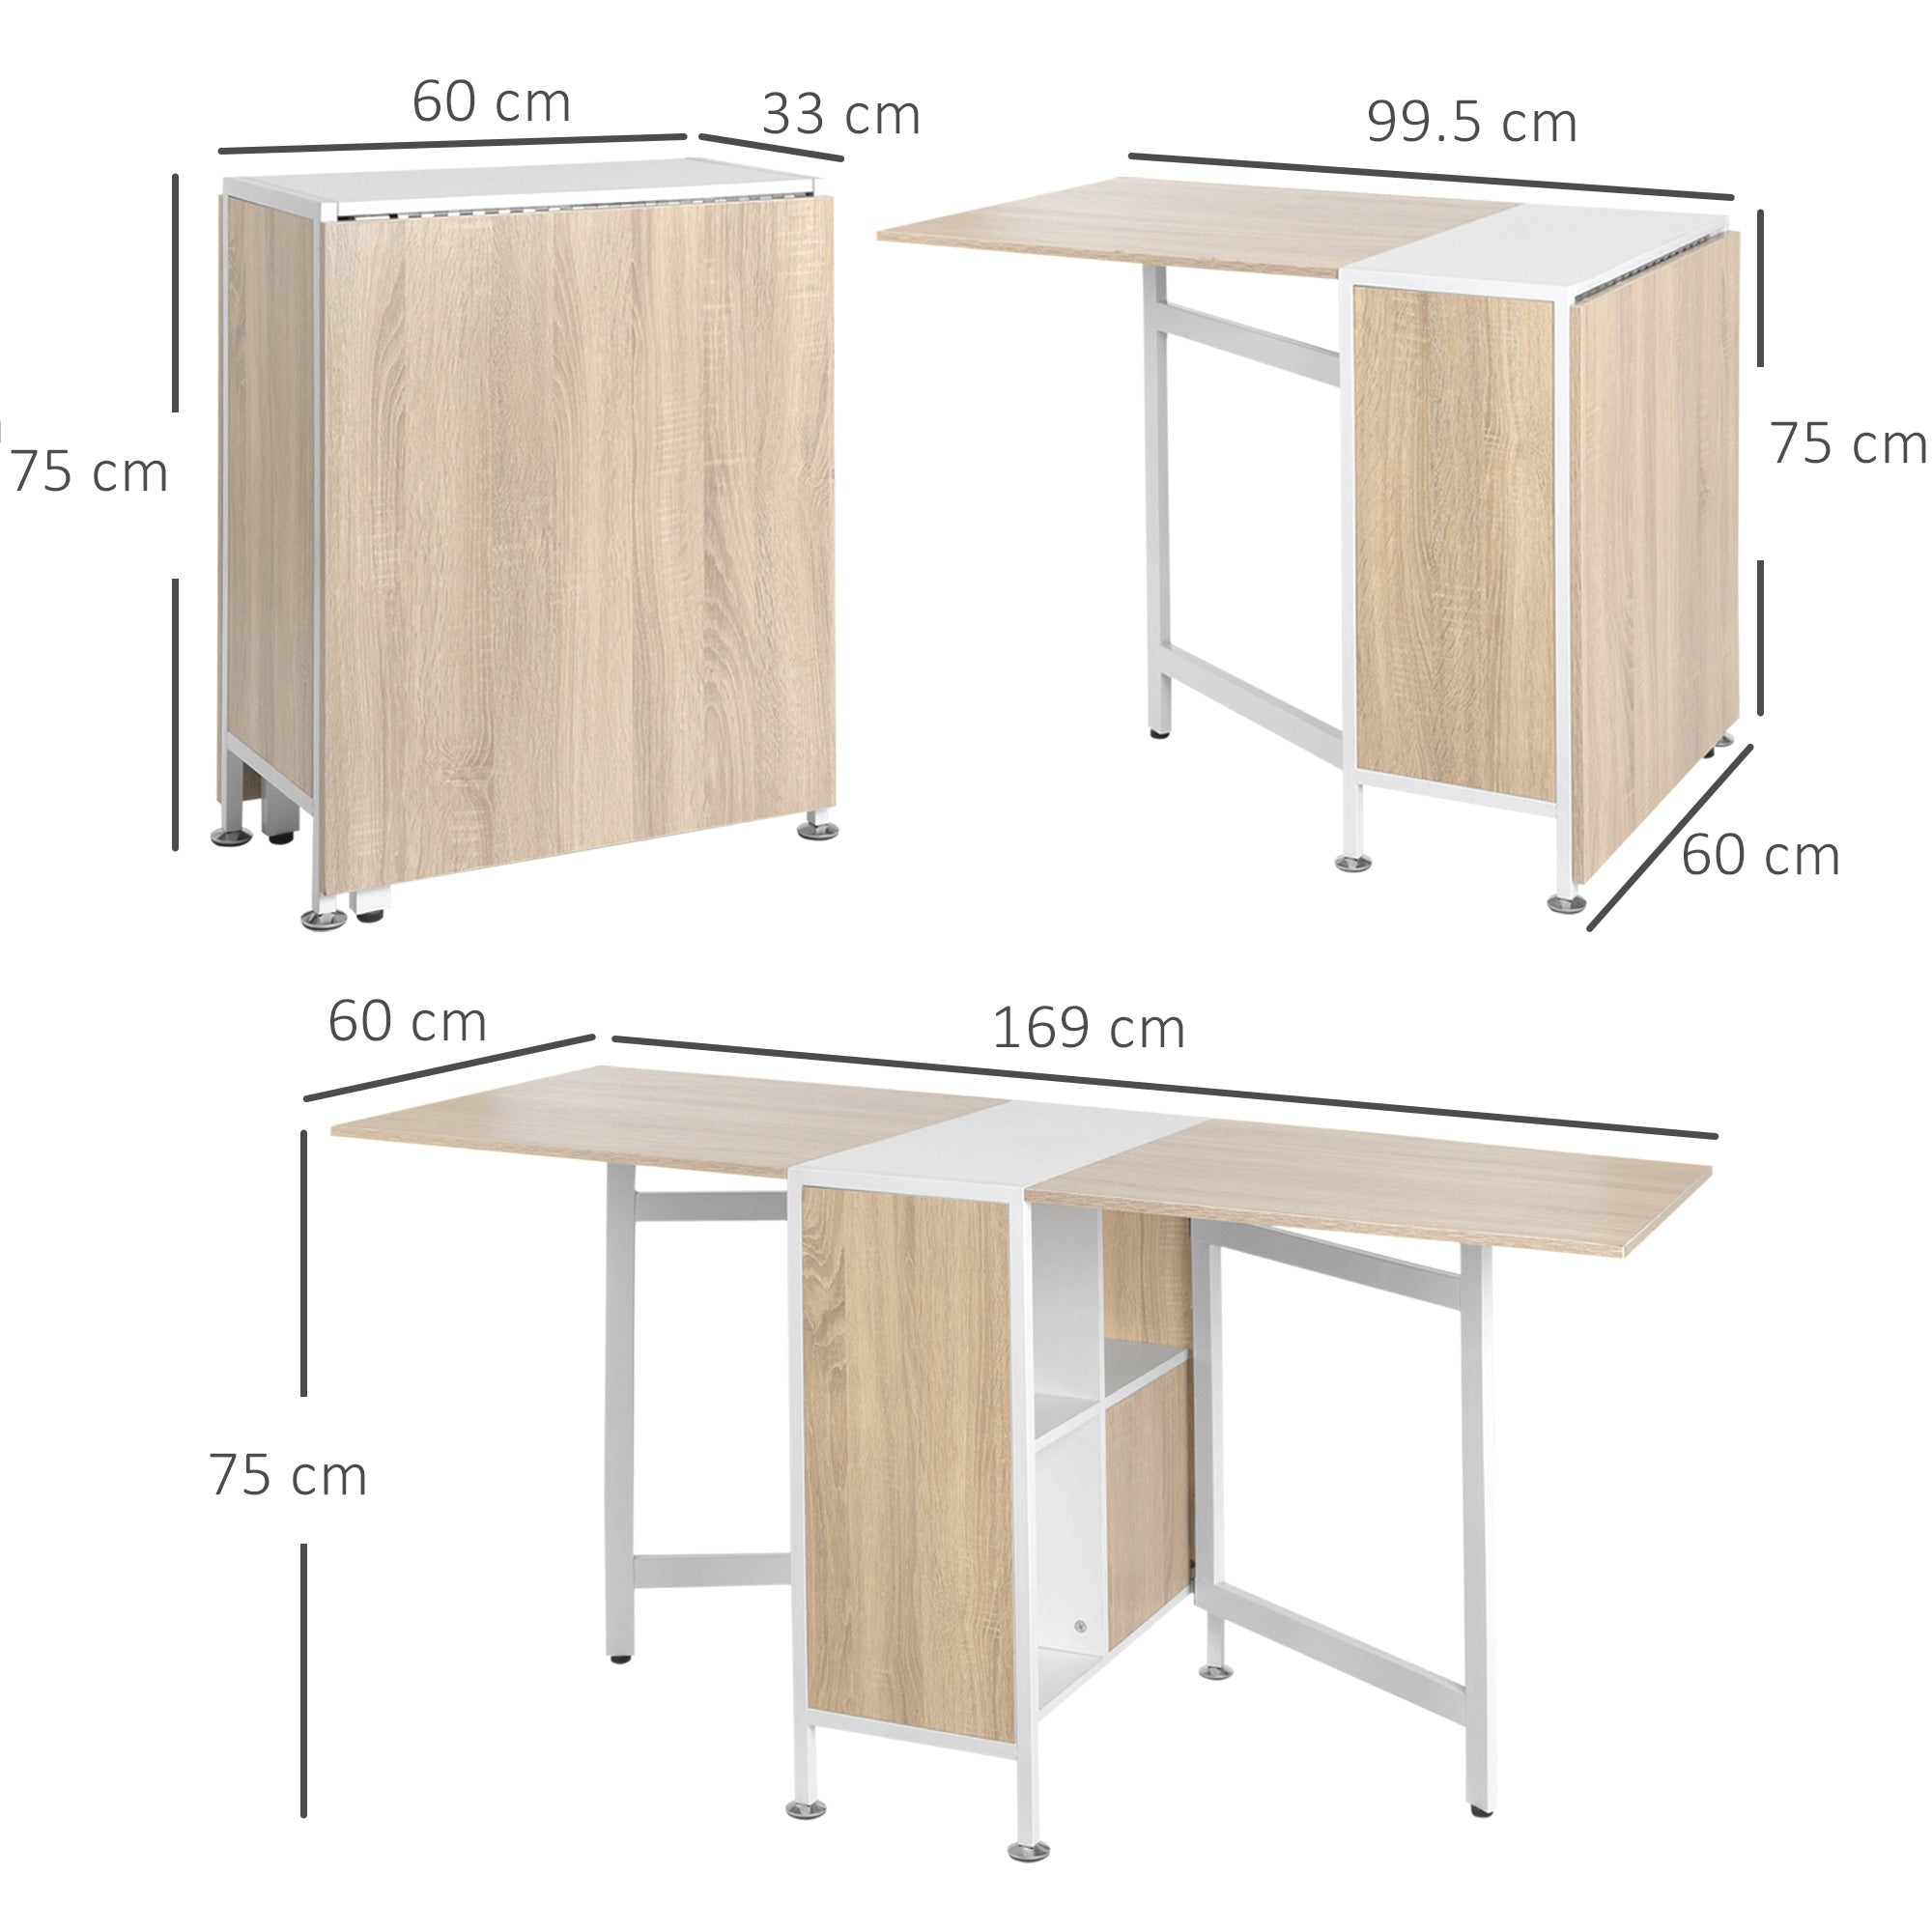 Foldable Dining Table Folding Workstation for Small Space with Storage Shelves Cubes Oak & White-2